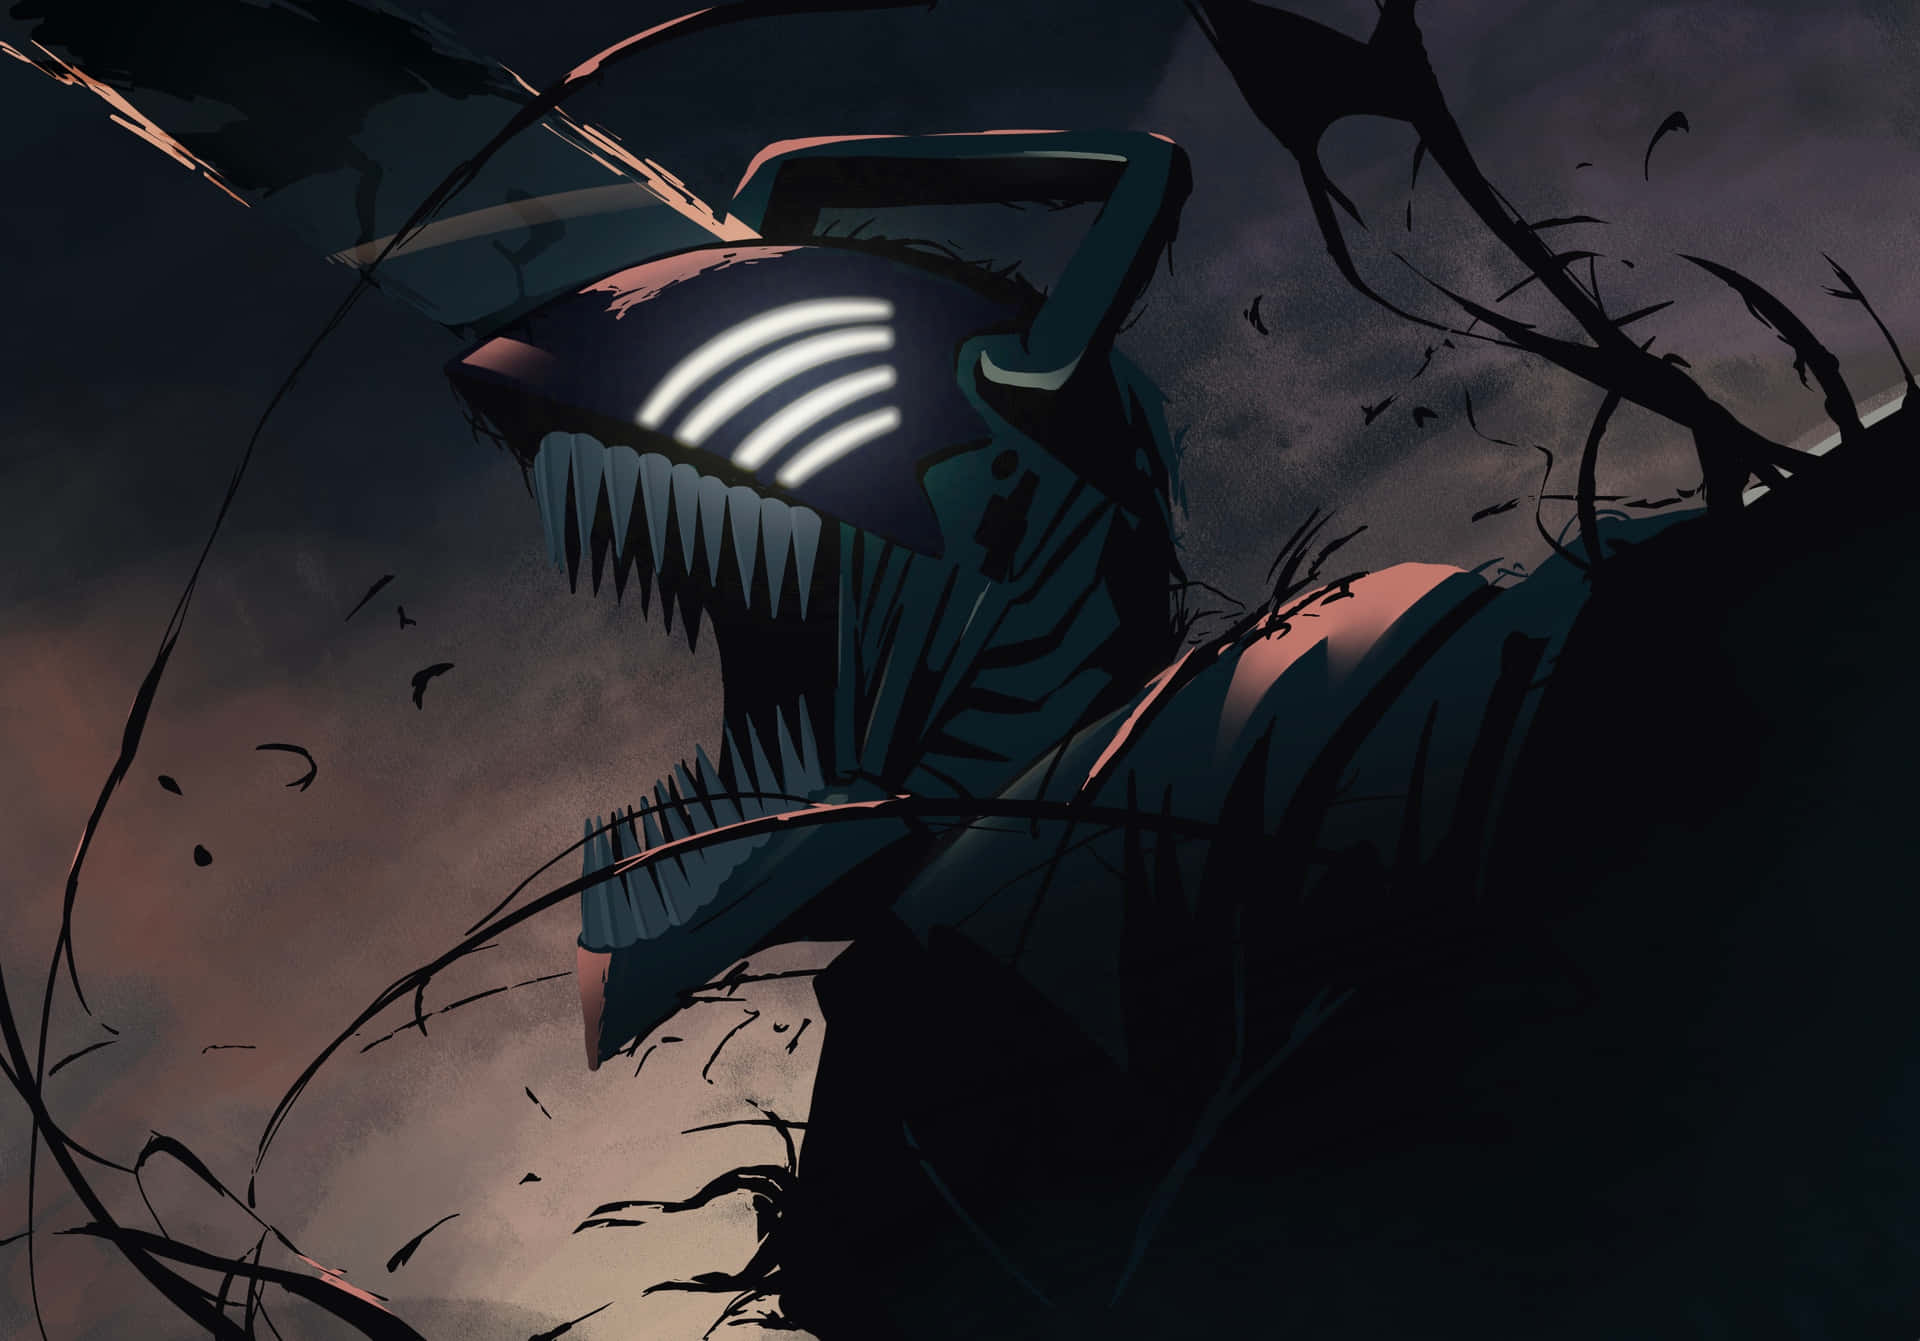 Spooky Cartoon Horror Creatures Emerging from the Night Wallpaper